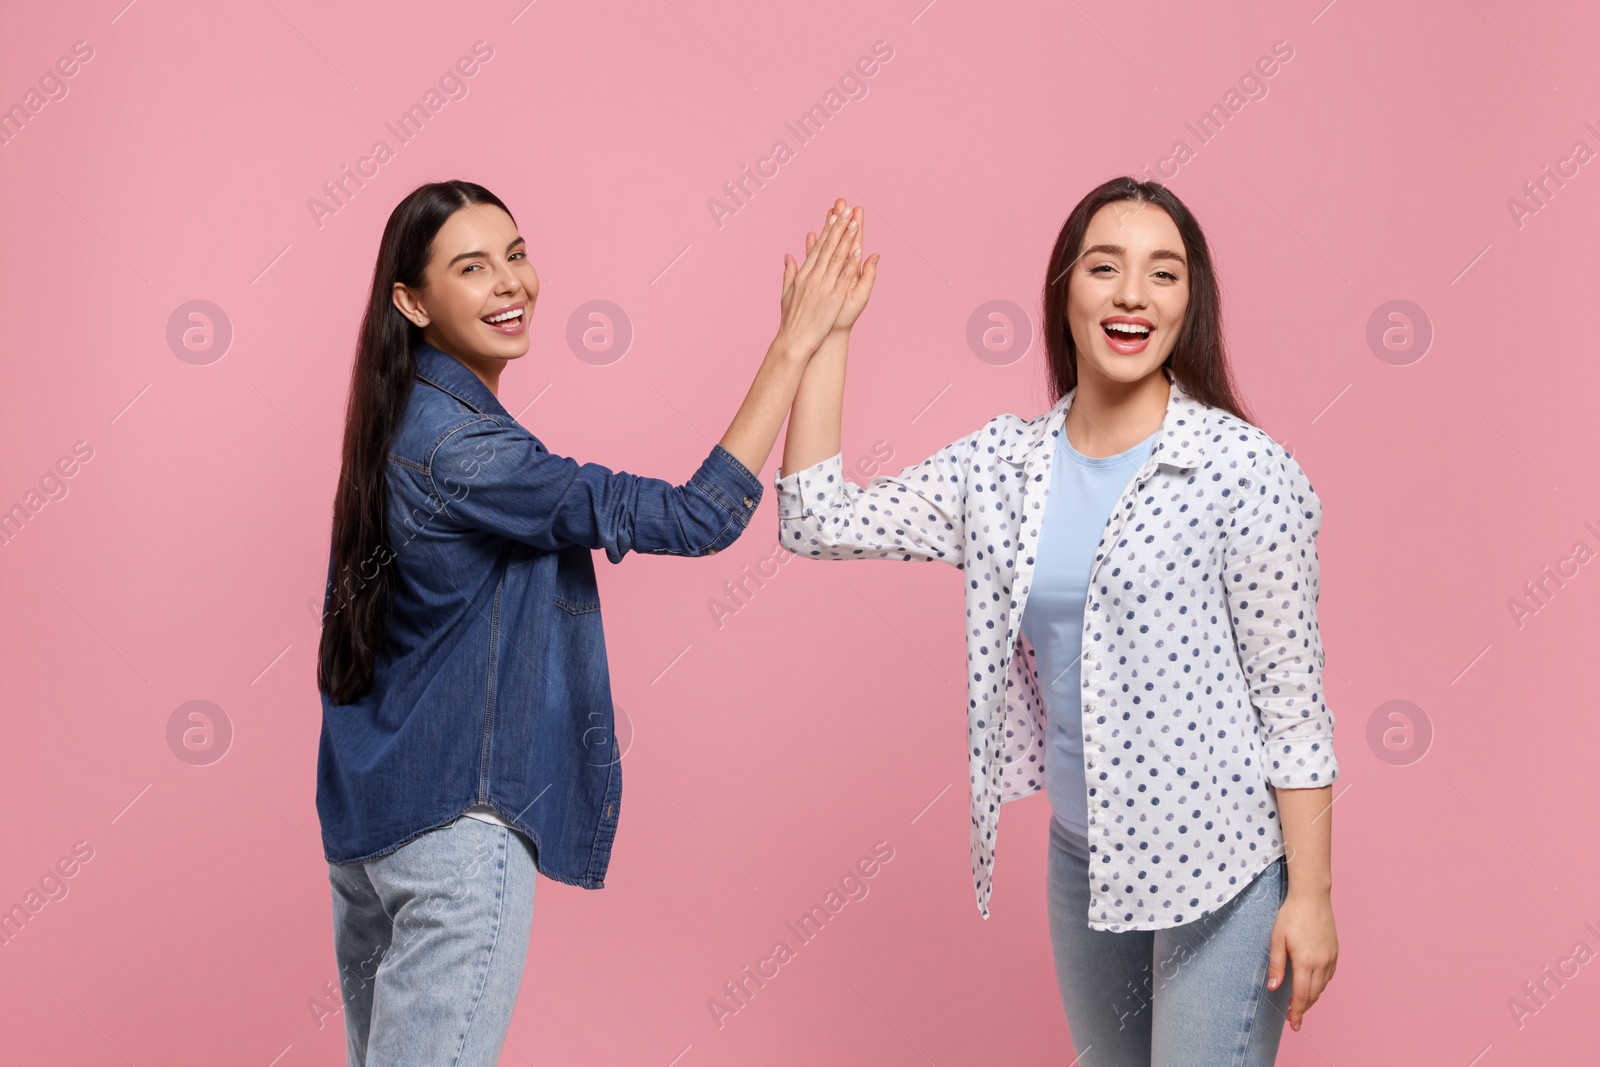 Photo of Women giving high five on pink background